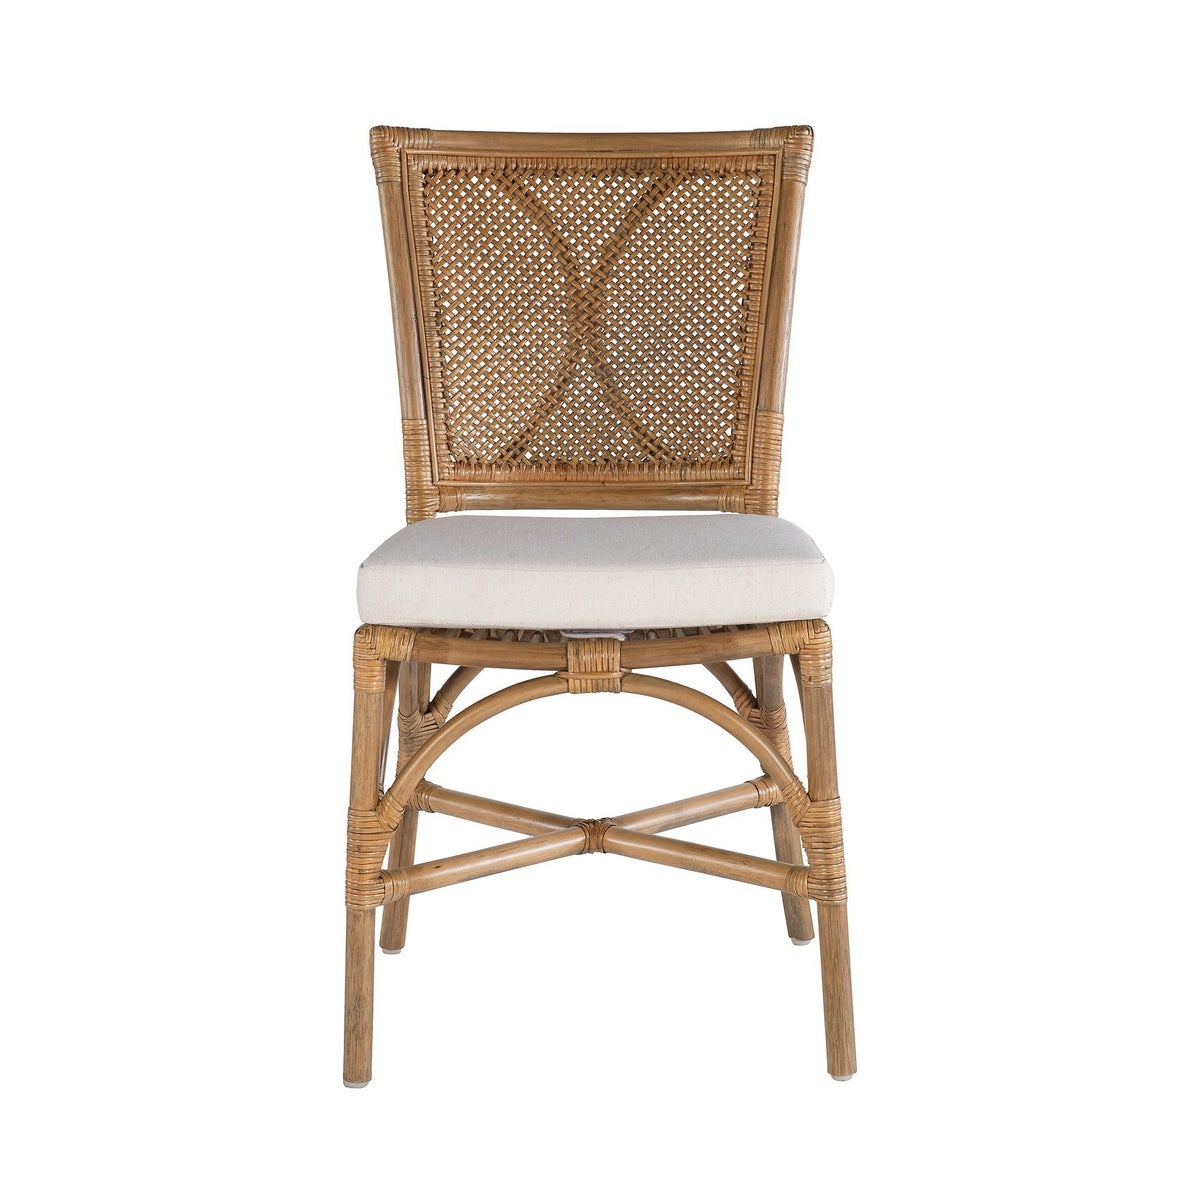 Java Side Chair Rattan Frame Color - Honey Brown Weave - Honey Brown Cushion Color - Cream Sold